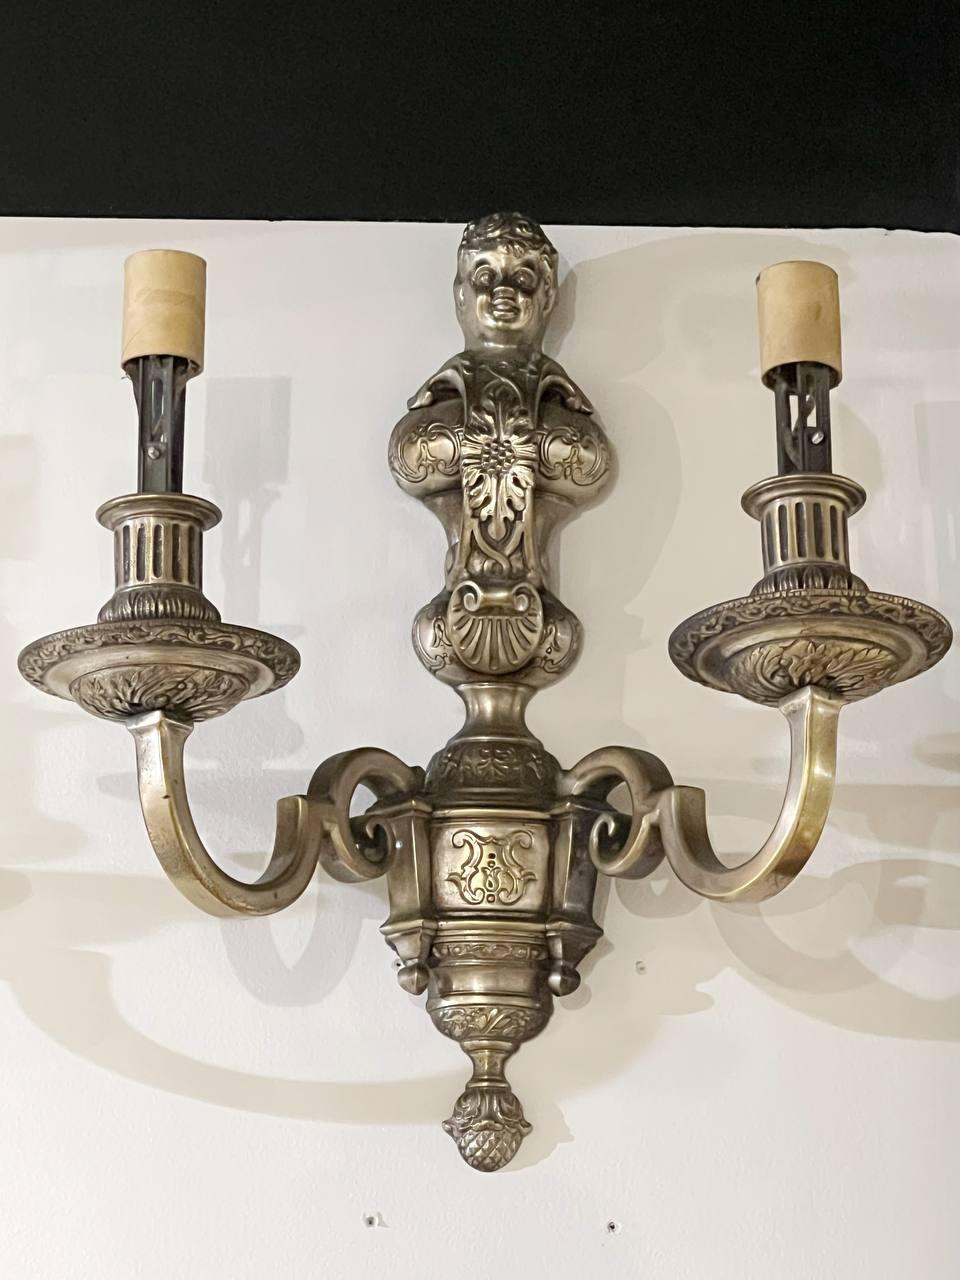 A pair of circa 1900s Caldwell Neoclassical silver plated sconces with cherub atop, two lights. Available matching chandelier  